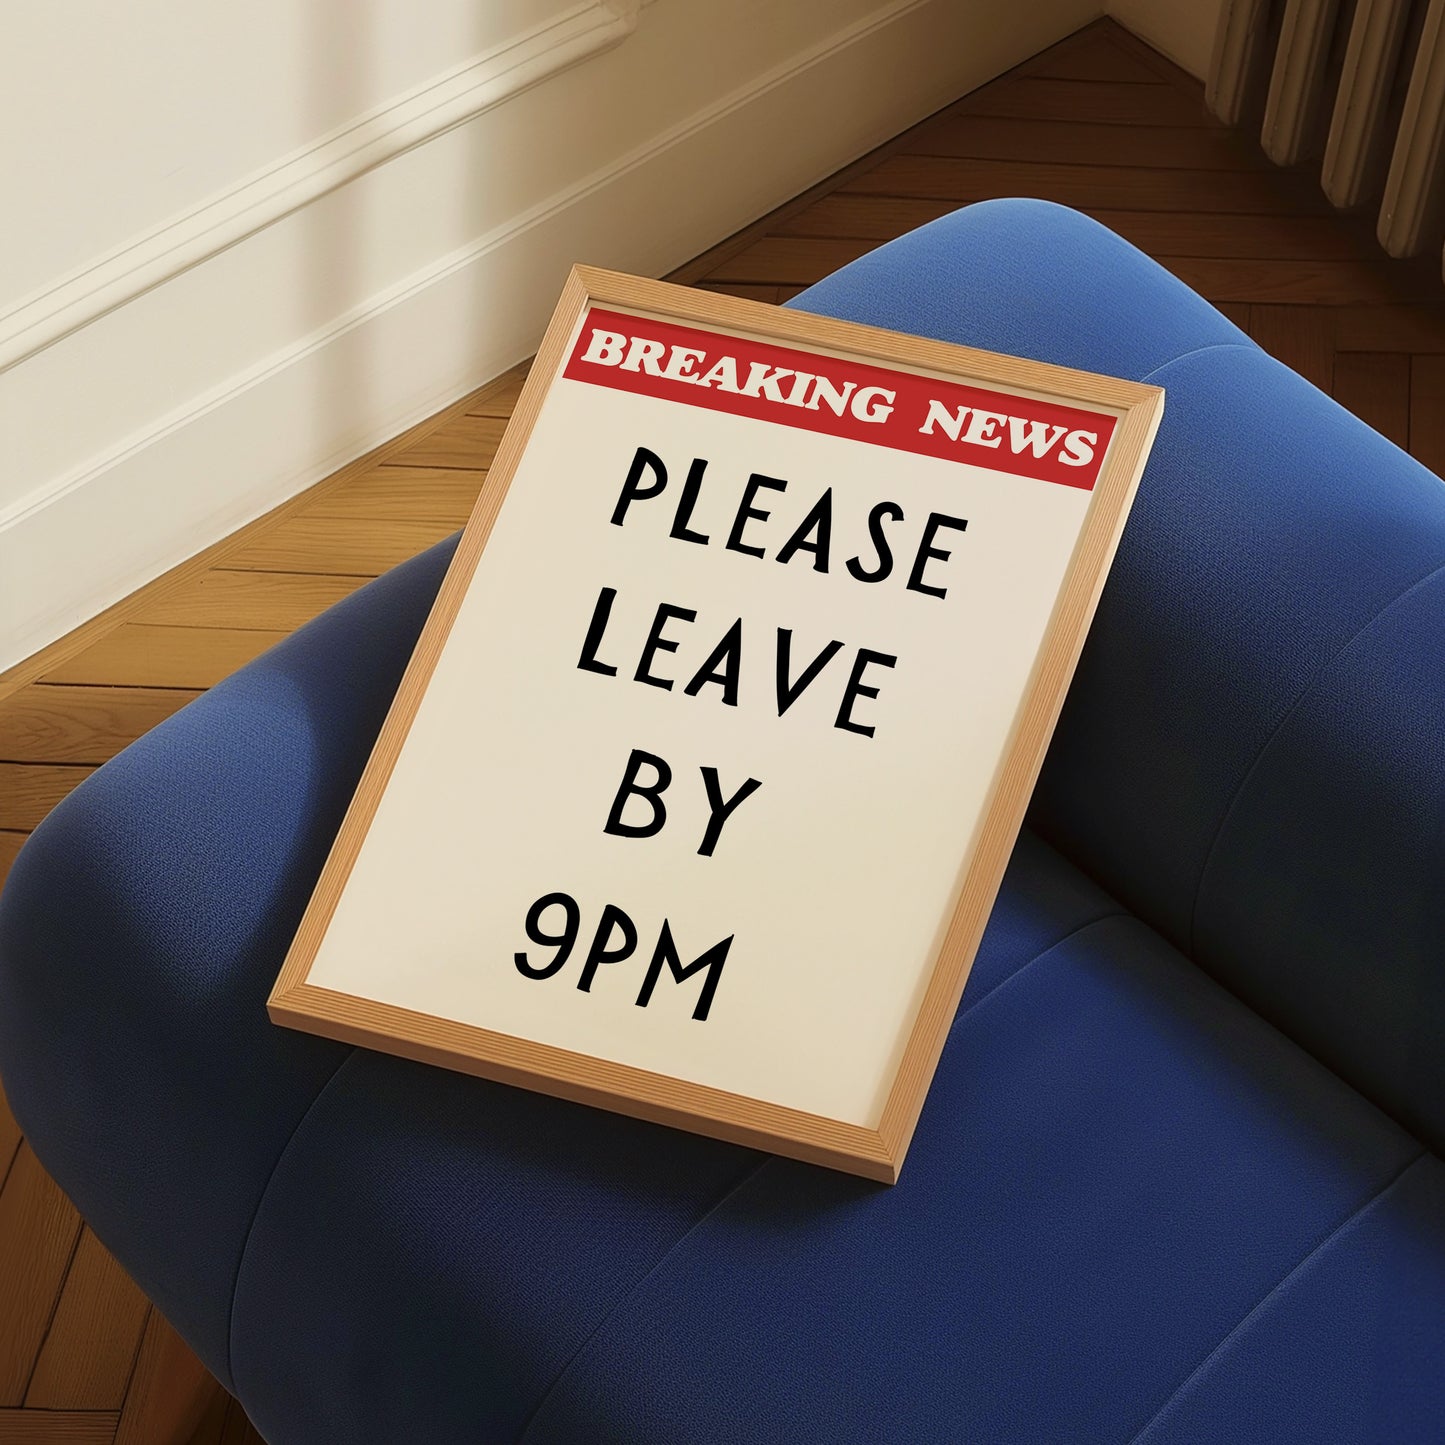 Please Leave By 9pm News Poster